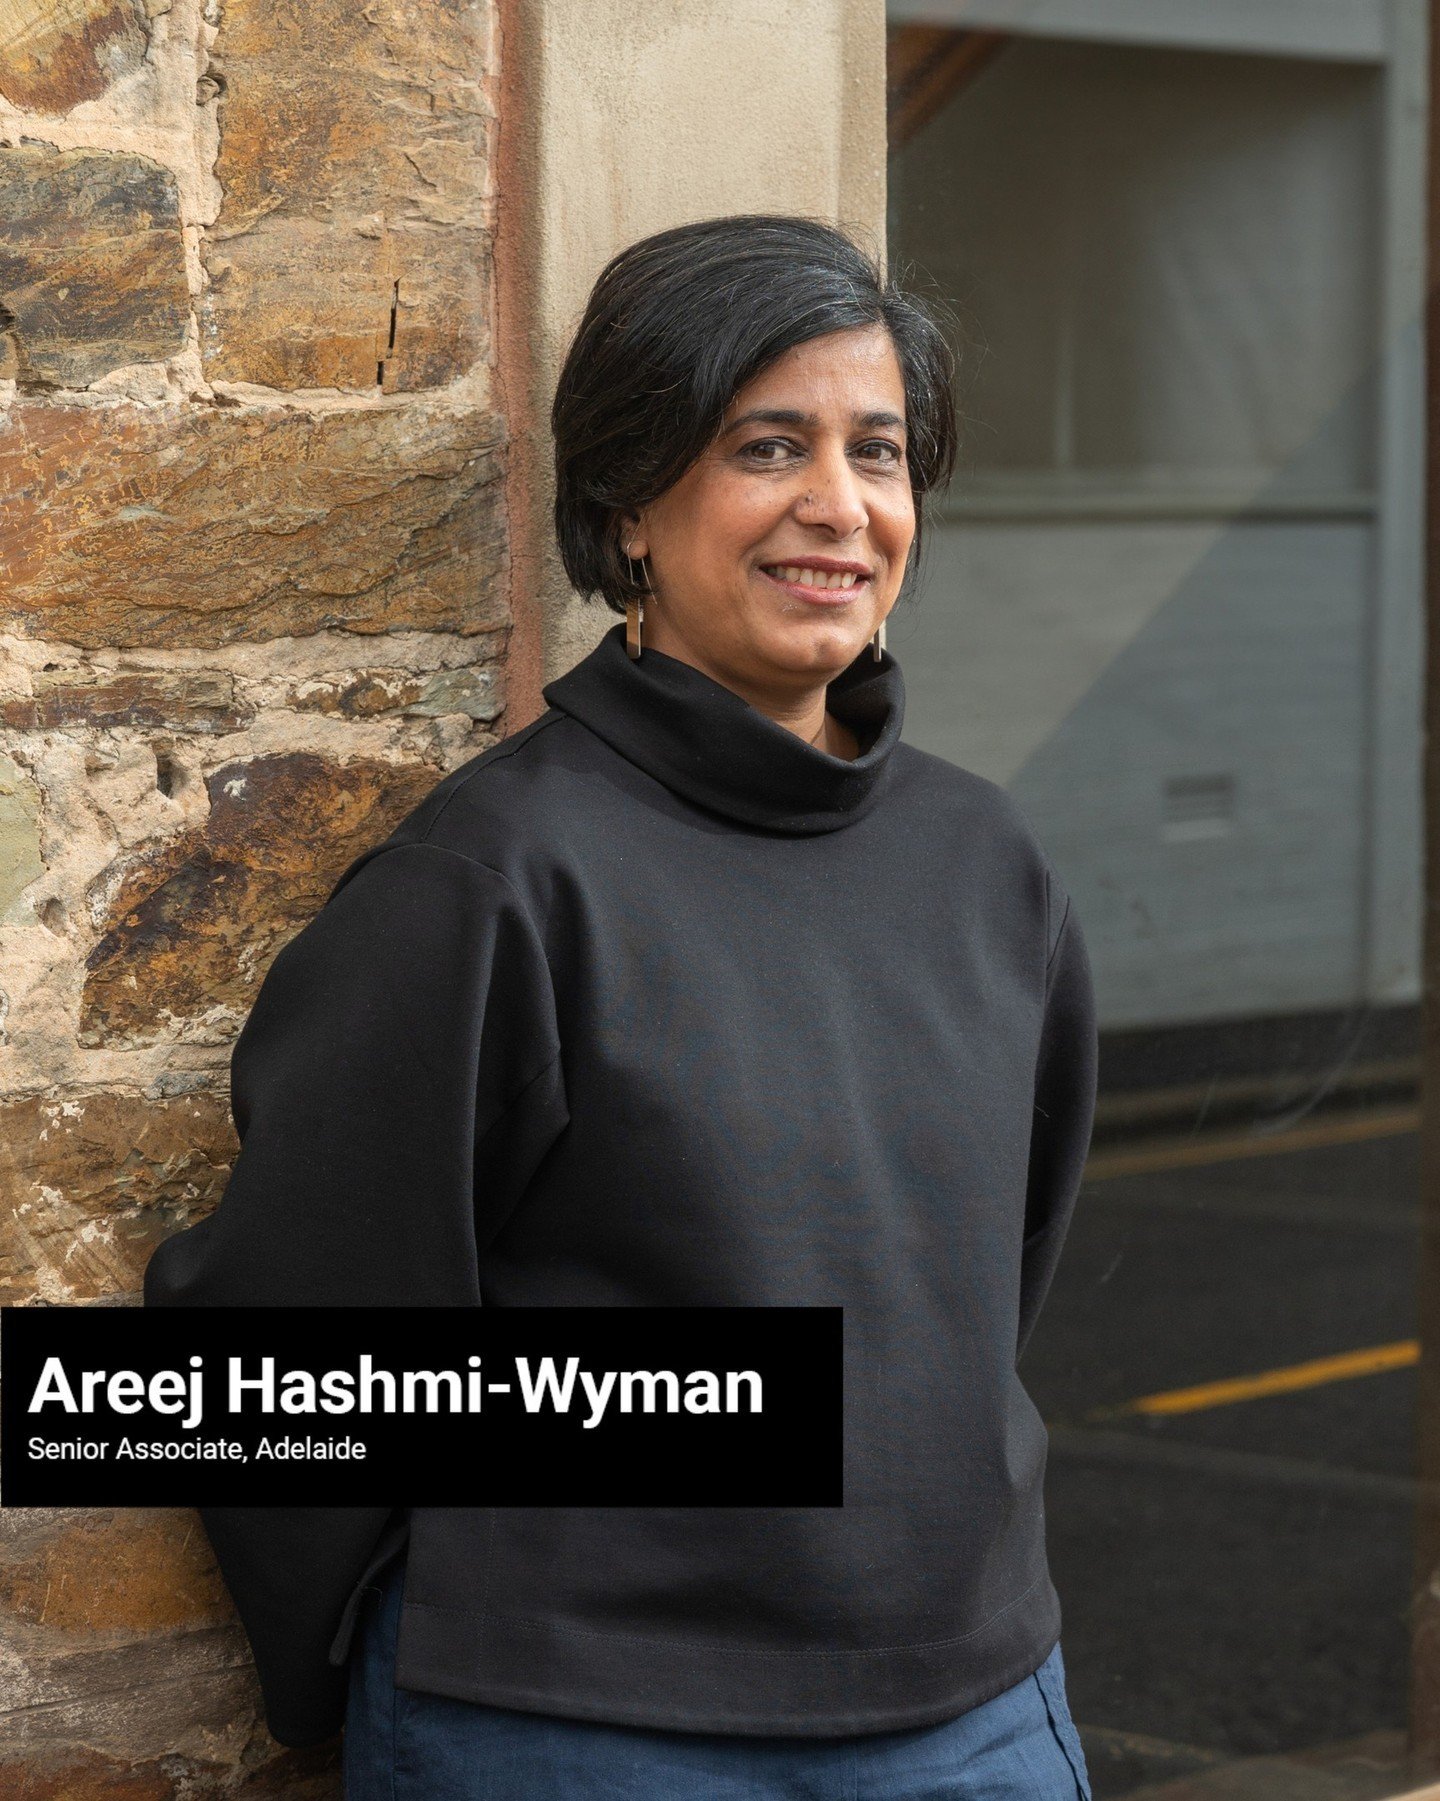 HAPPY MOTHER'S DAY!⁠
⁠
This year, we're taking a moment to highlight the multi-faceted, Areej Hashmi-Weyman, Senior Associate at Plus's newly established Adelaide studio. ⁠
⁠
In addition to her work at Plus, Areej wears many hats, from parenting two 